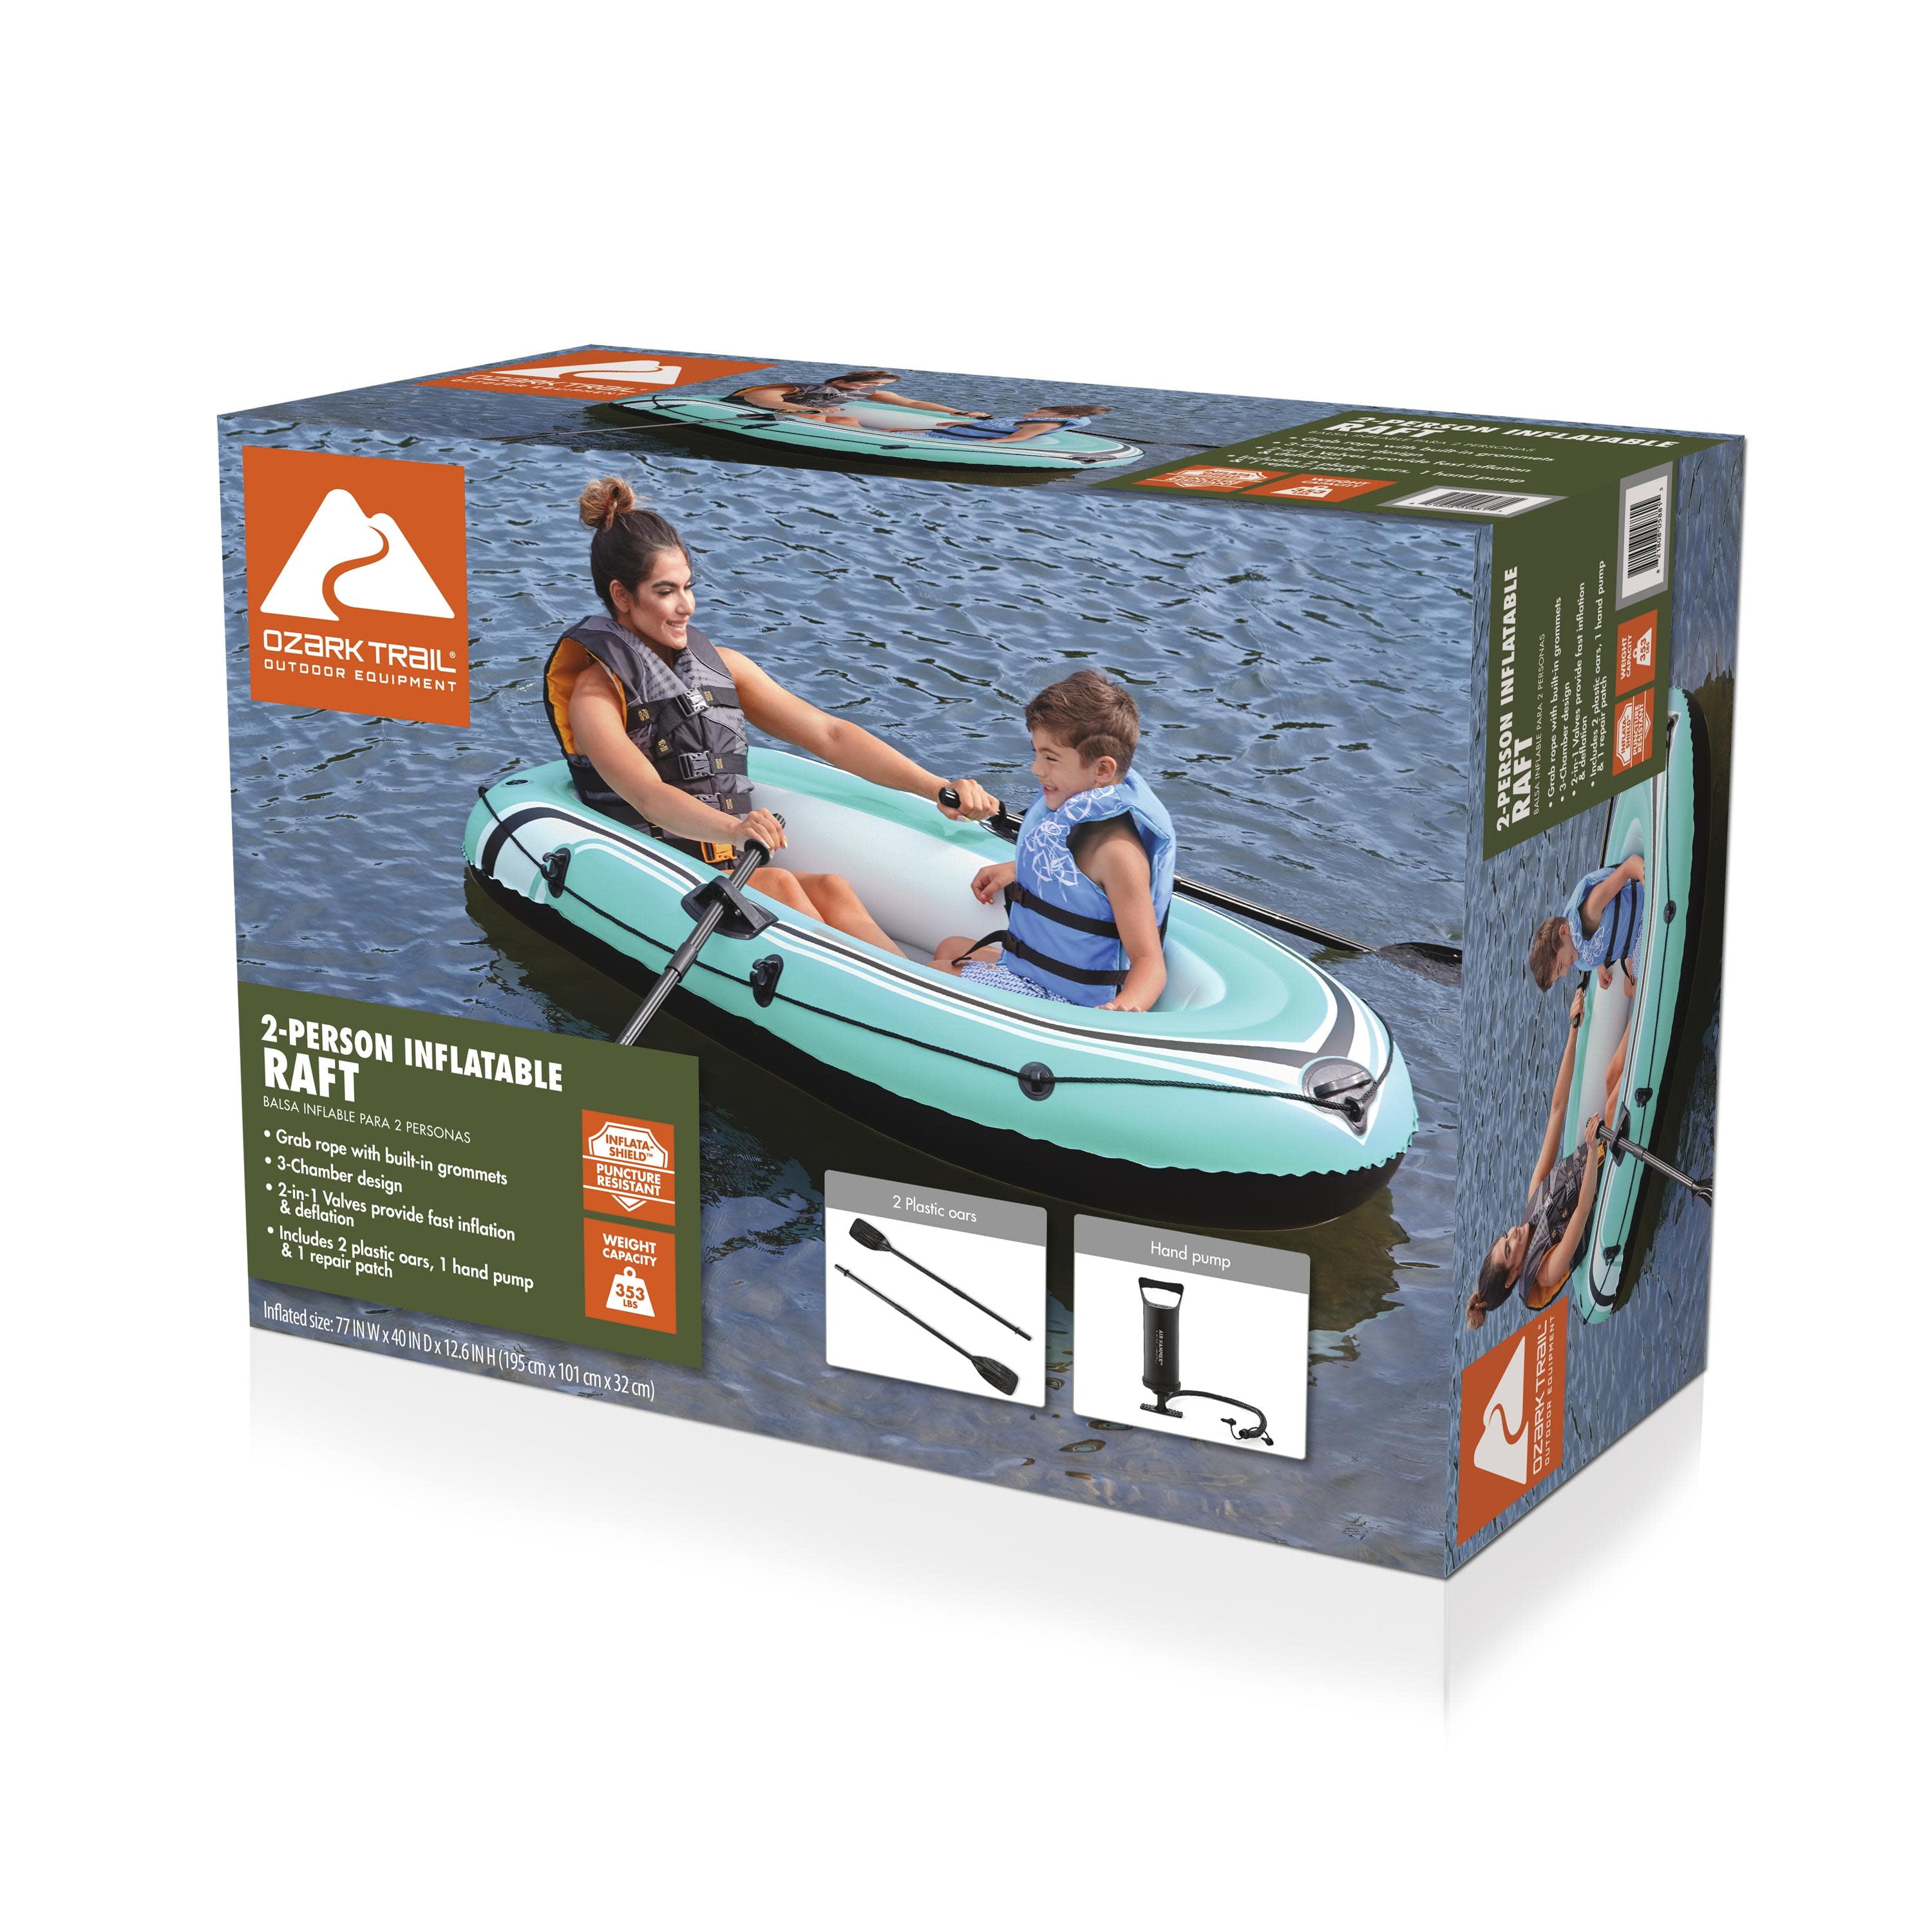 Ozark Trail 77 in. x 40 in. 2 Person PVC Inflatable Raft